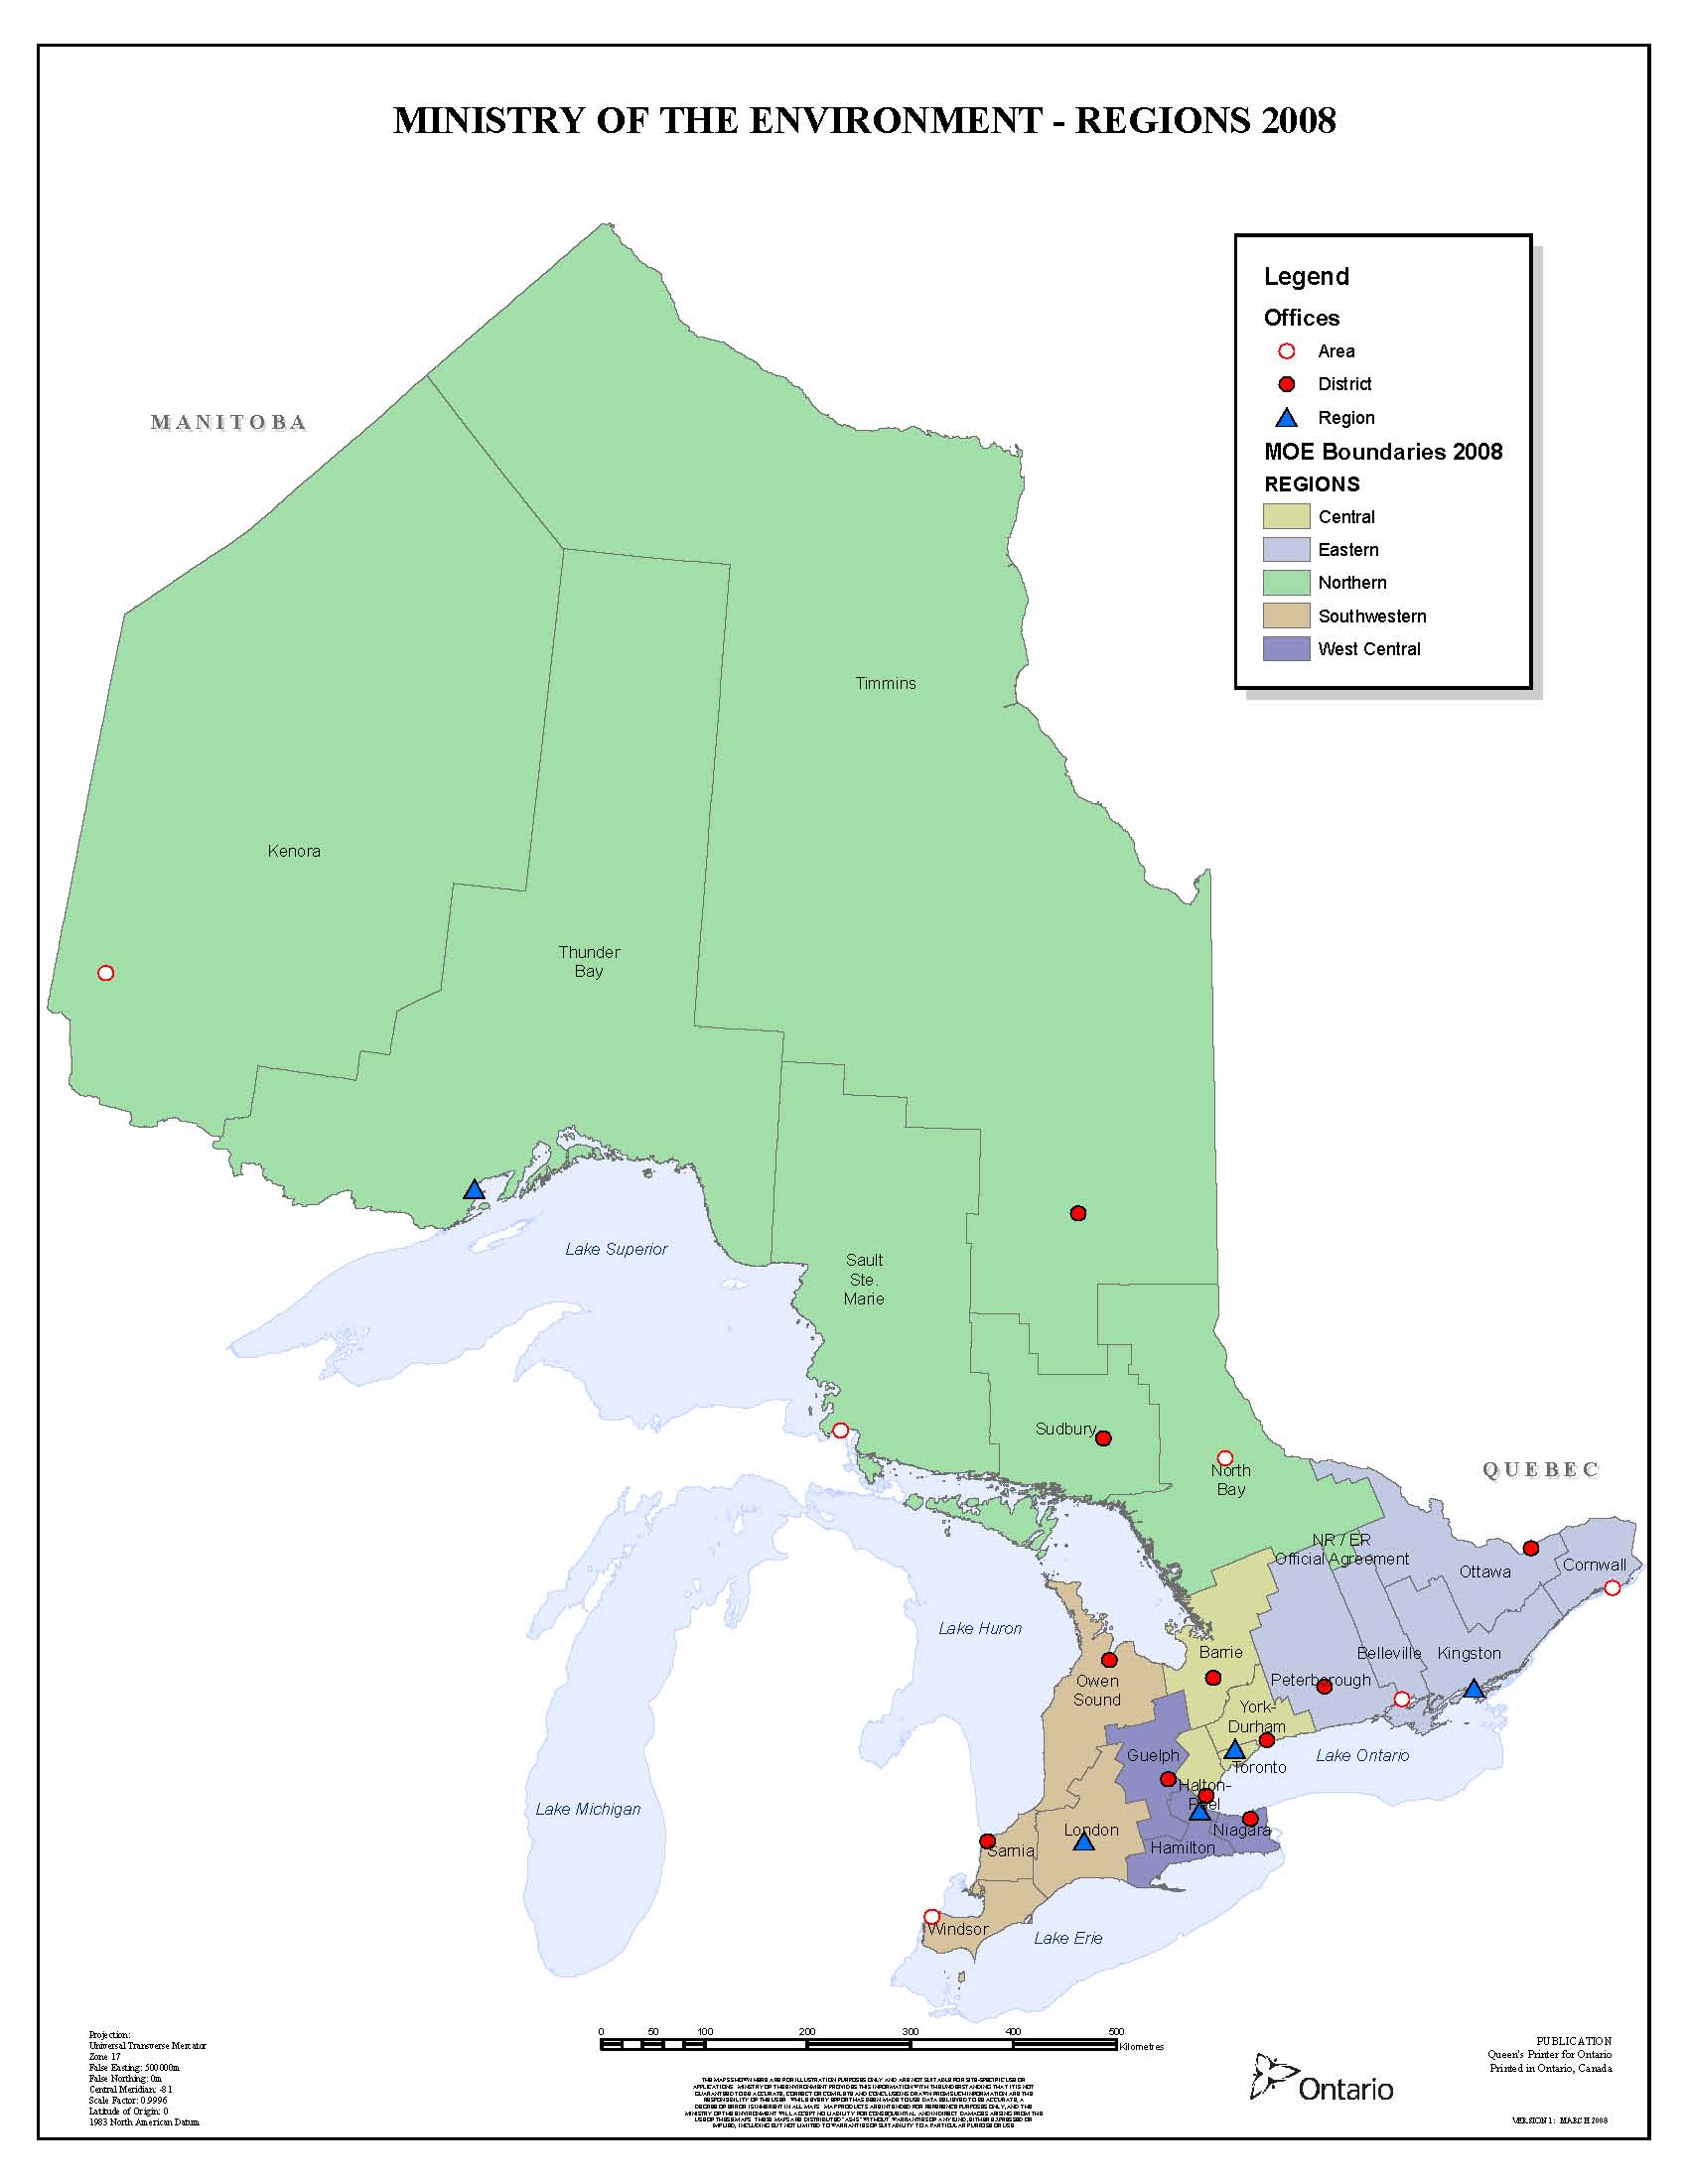 Map of Ontario by Regions Designated by Ministry of the Envrionment as of 2008.